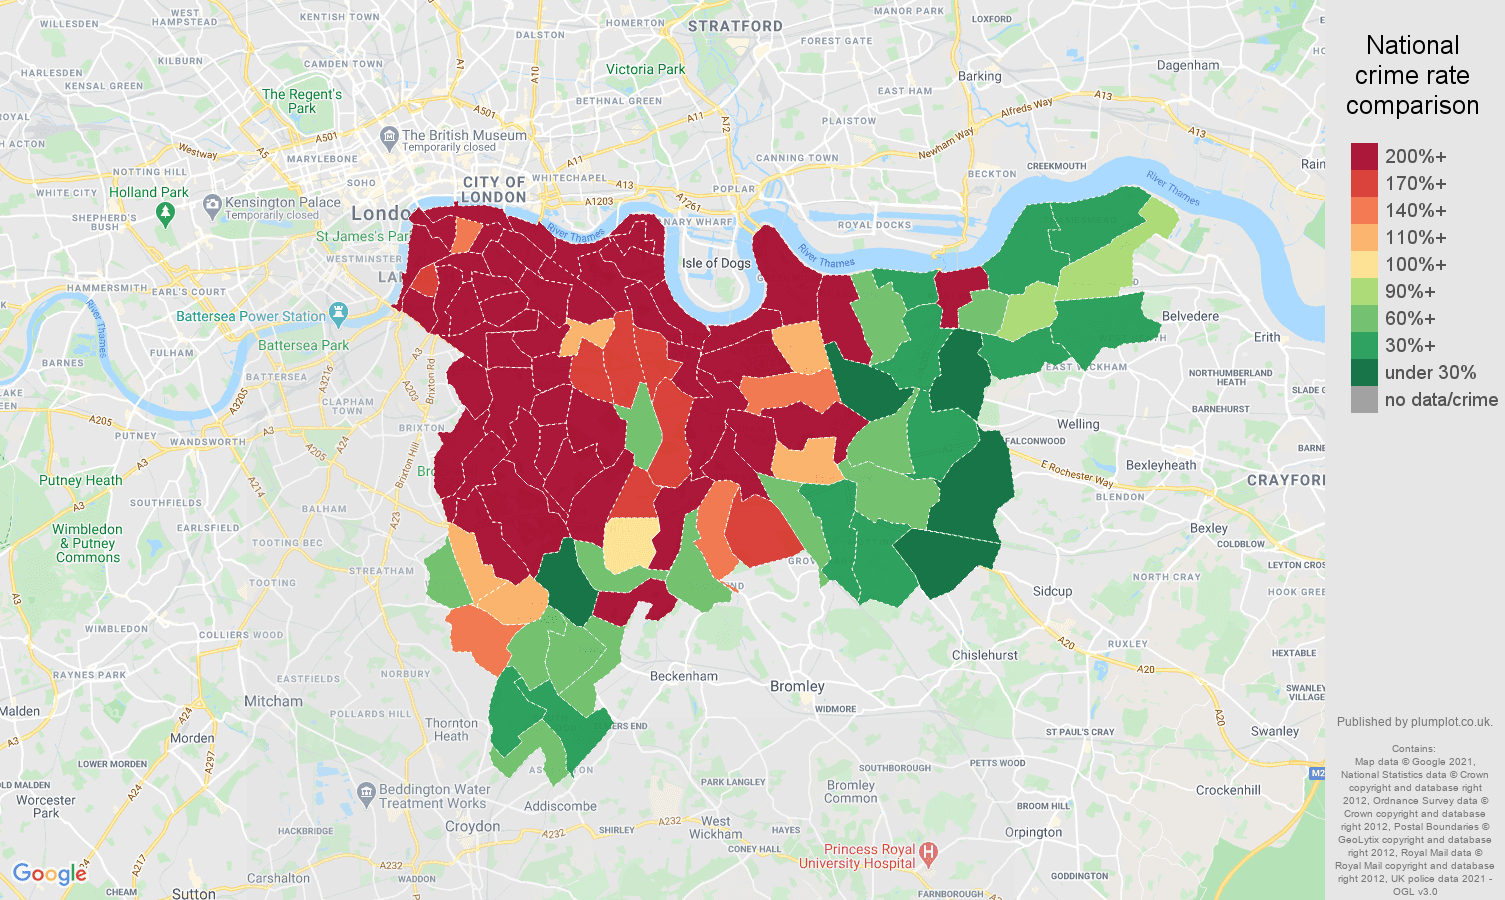 South East London bicycle theft crime rate comparison map